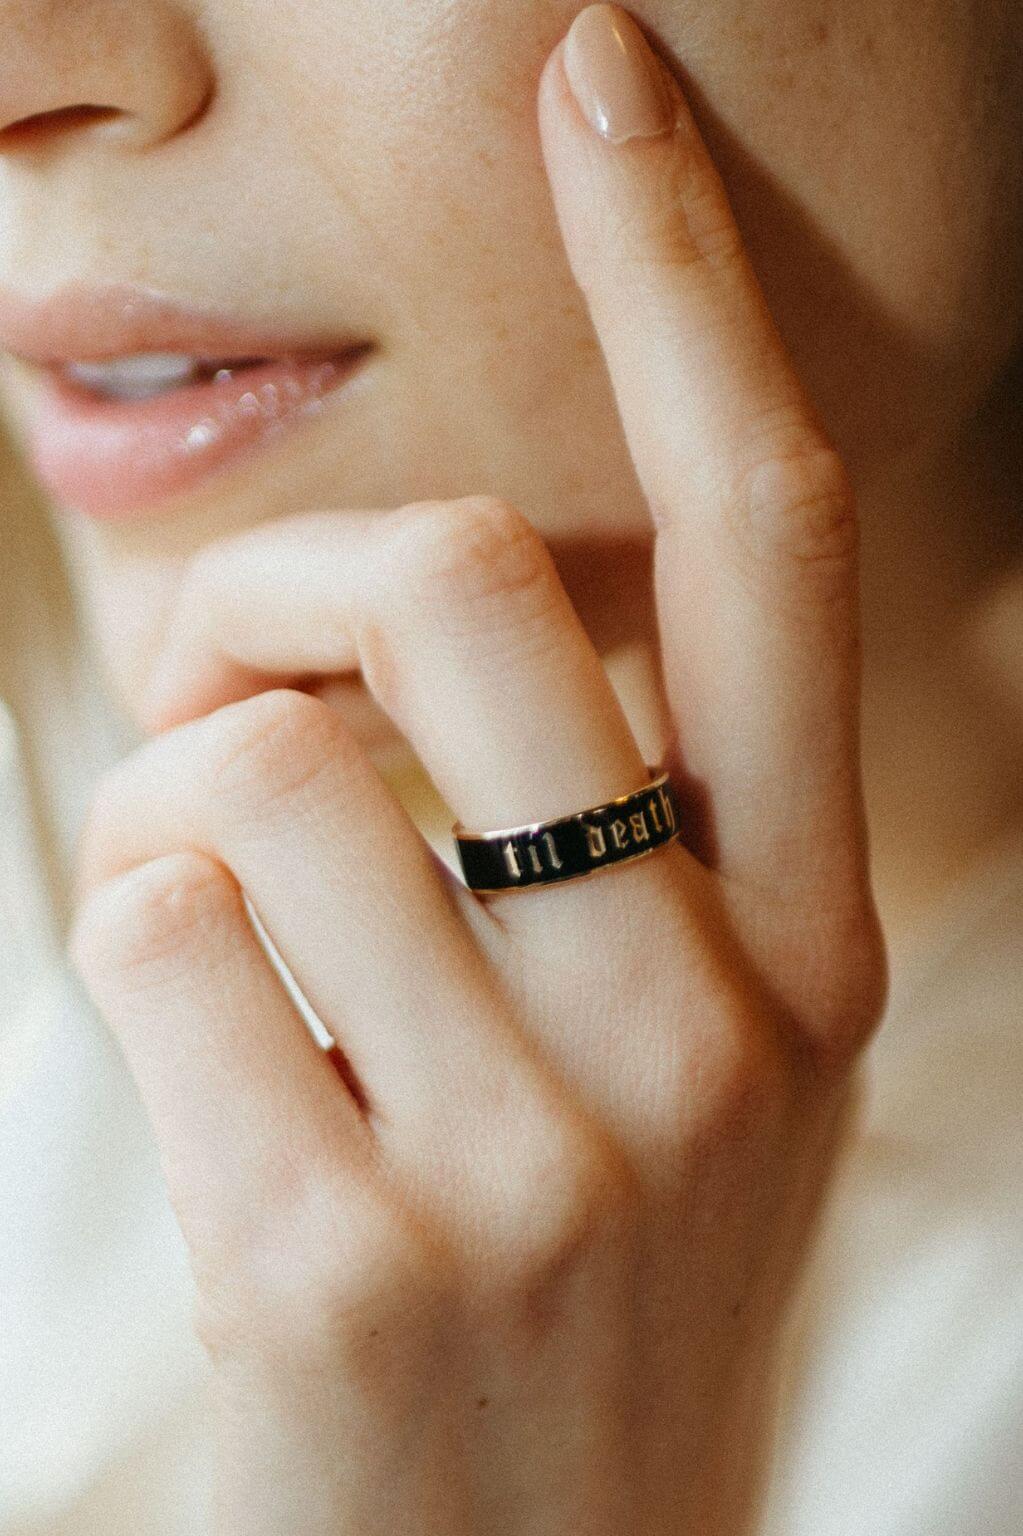 close up of woman's hand resting against her face with a Til Death Enamel Band on her middle finger